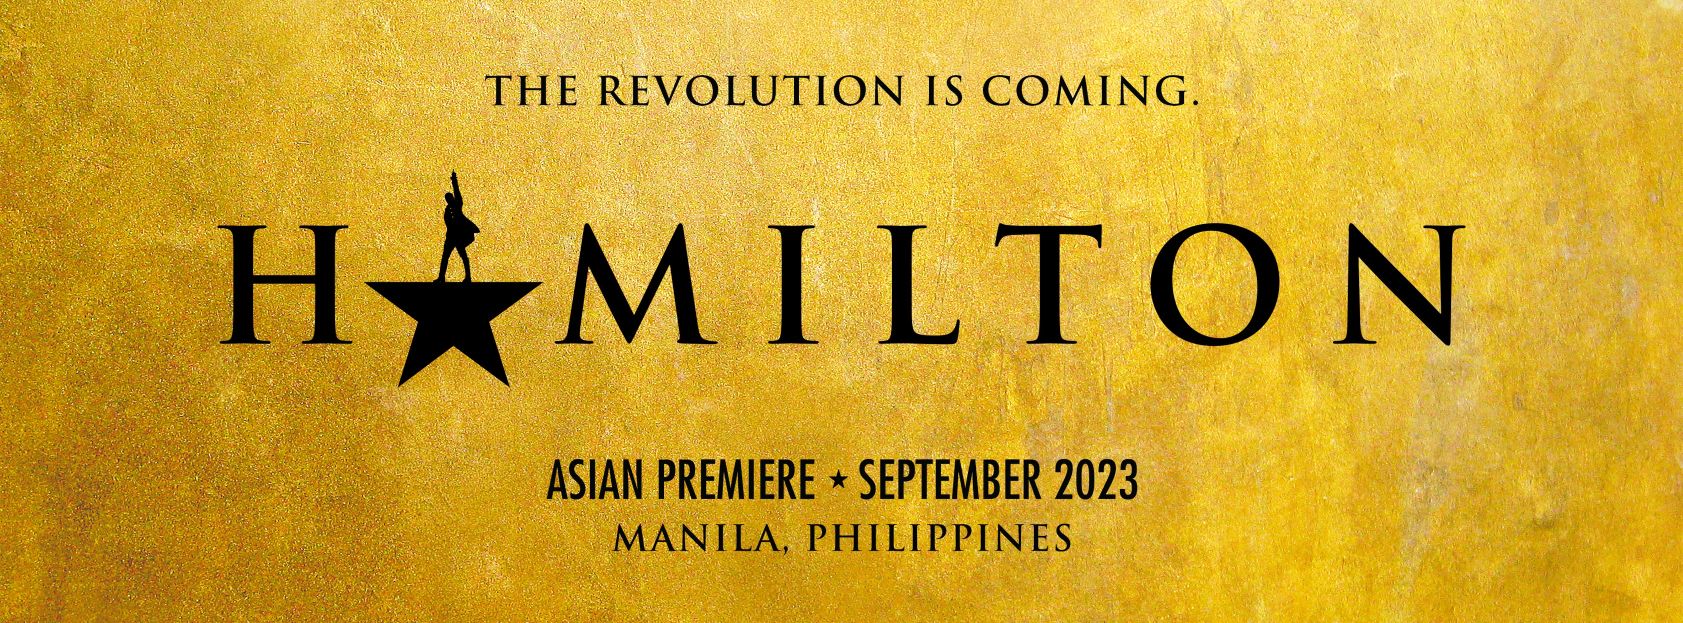 Don’t throw away your shot: Hamilton is coming to the Philippines!